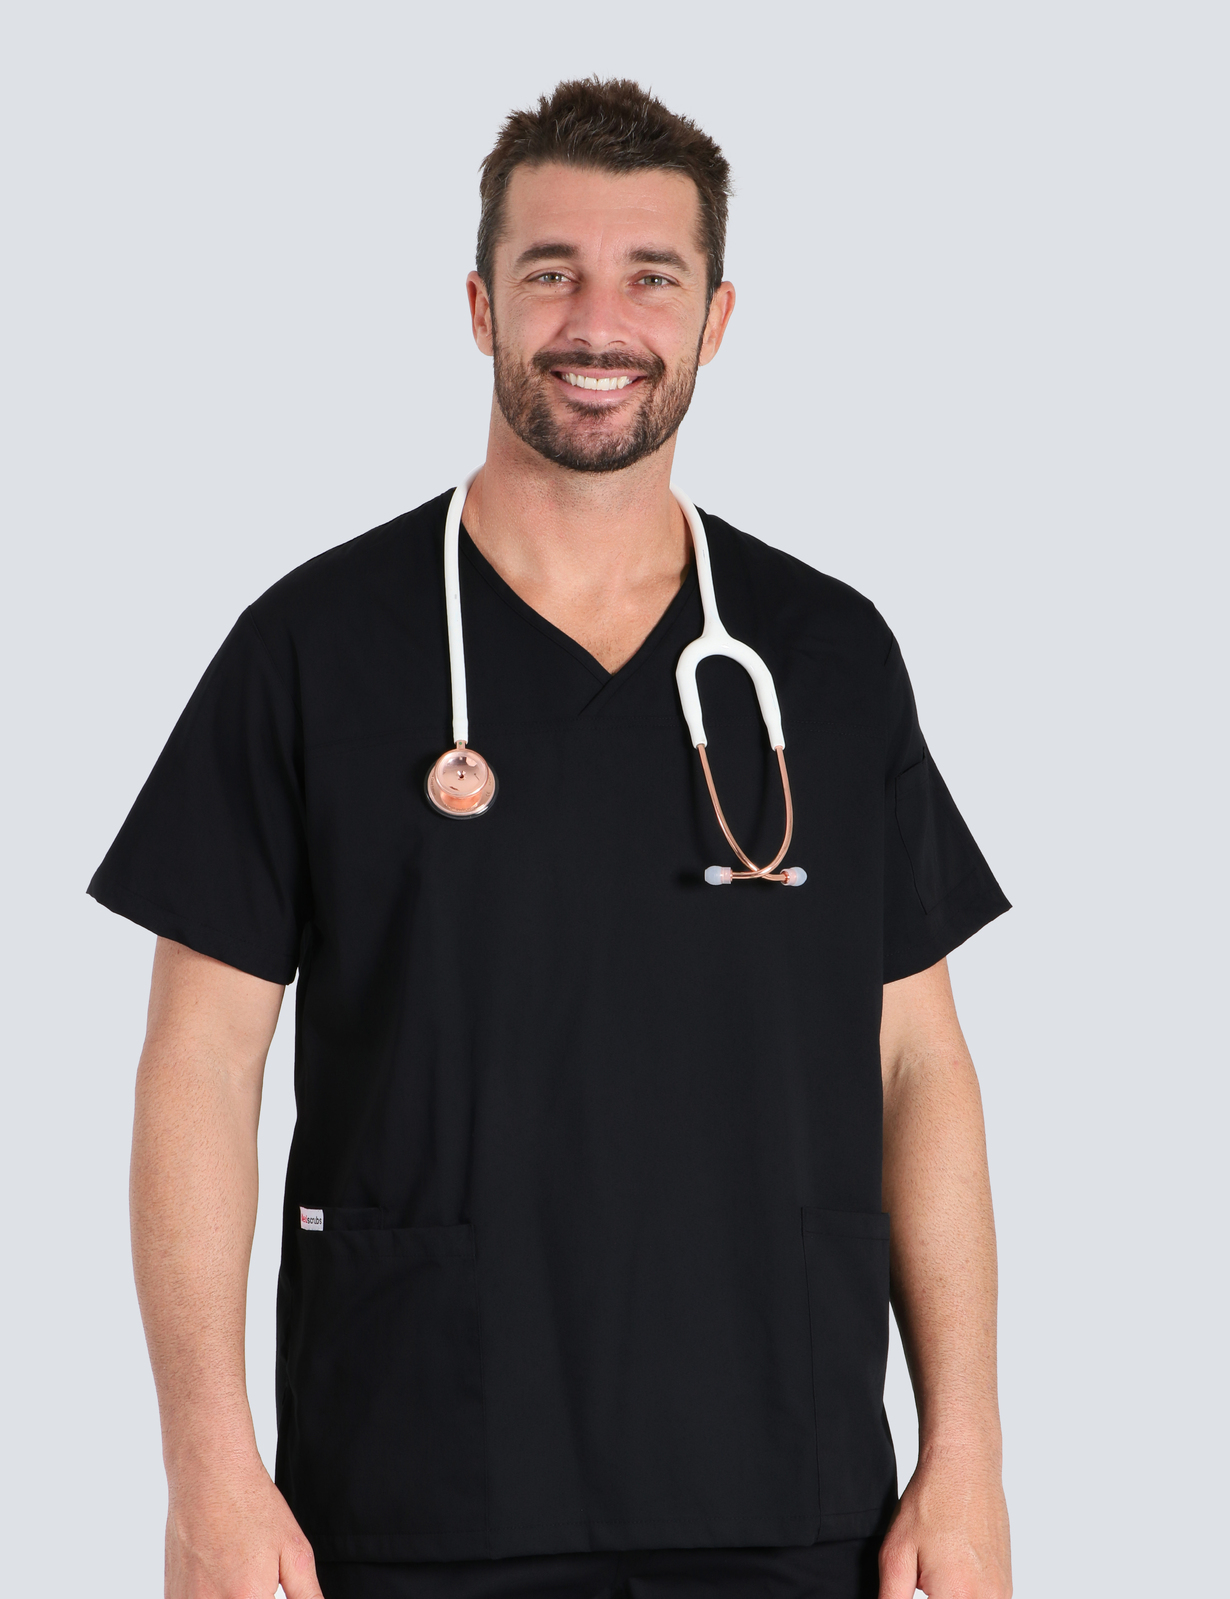 RBWH - Nuclear Medicine Department (Men's Fit Solid Top in Black incl Logos)